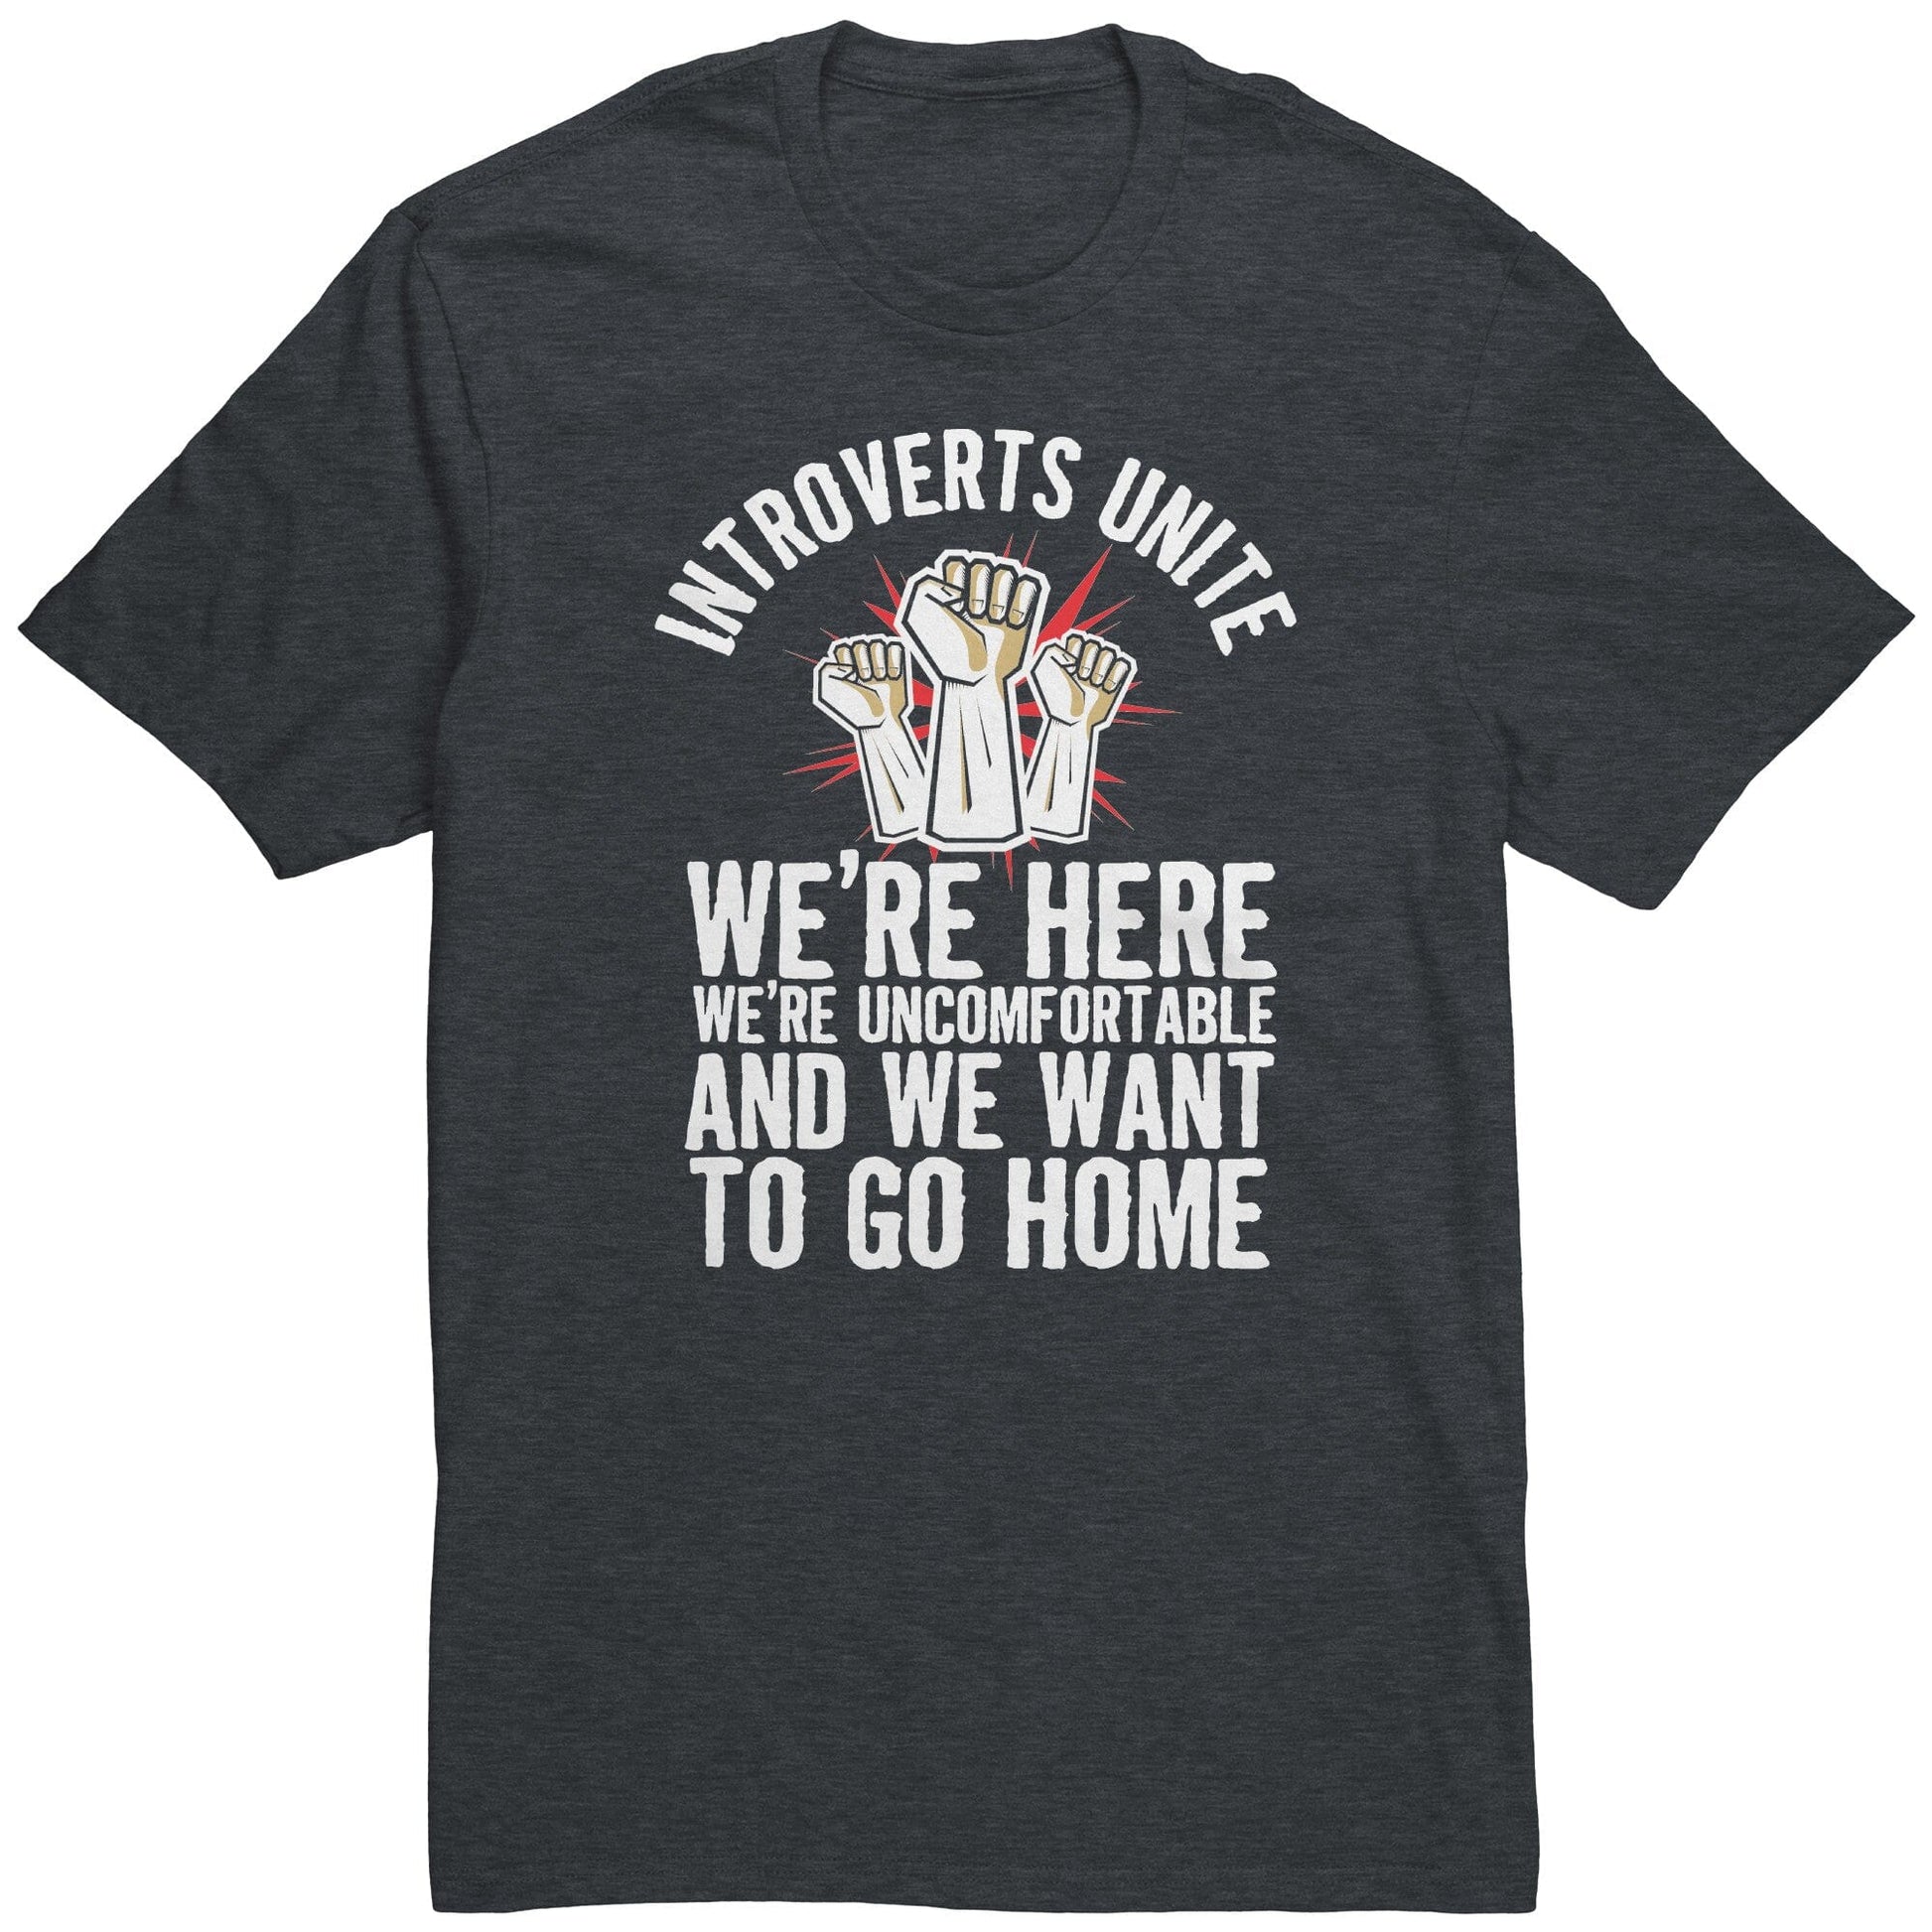 Funny "Introverts Unite - We're Here, We're Uncomfortable, and We Want To Go Home" Shirt Apparel Heathered Charcoal S 